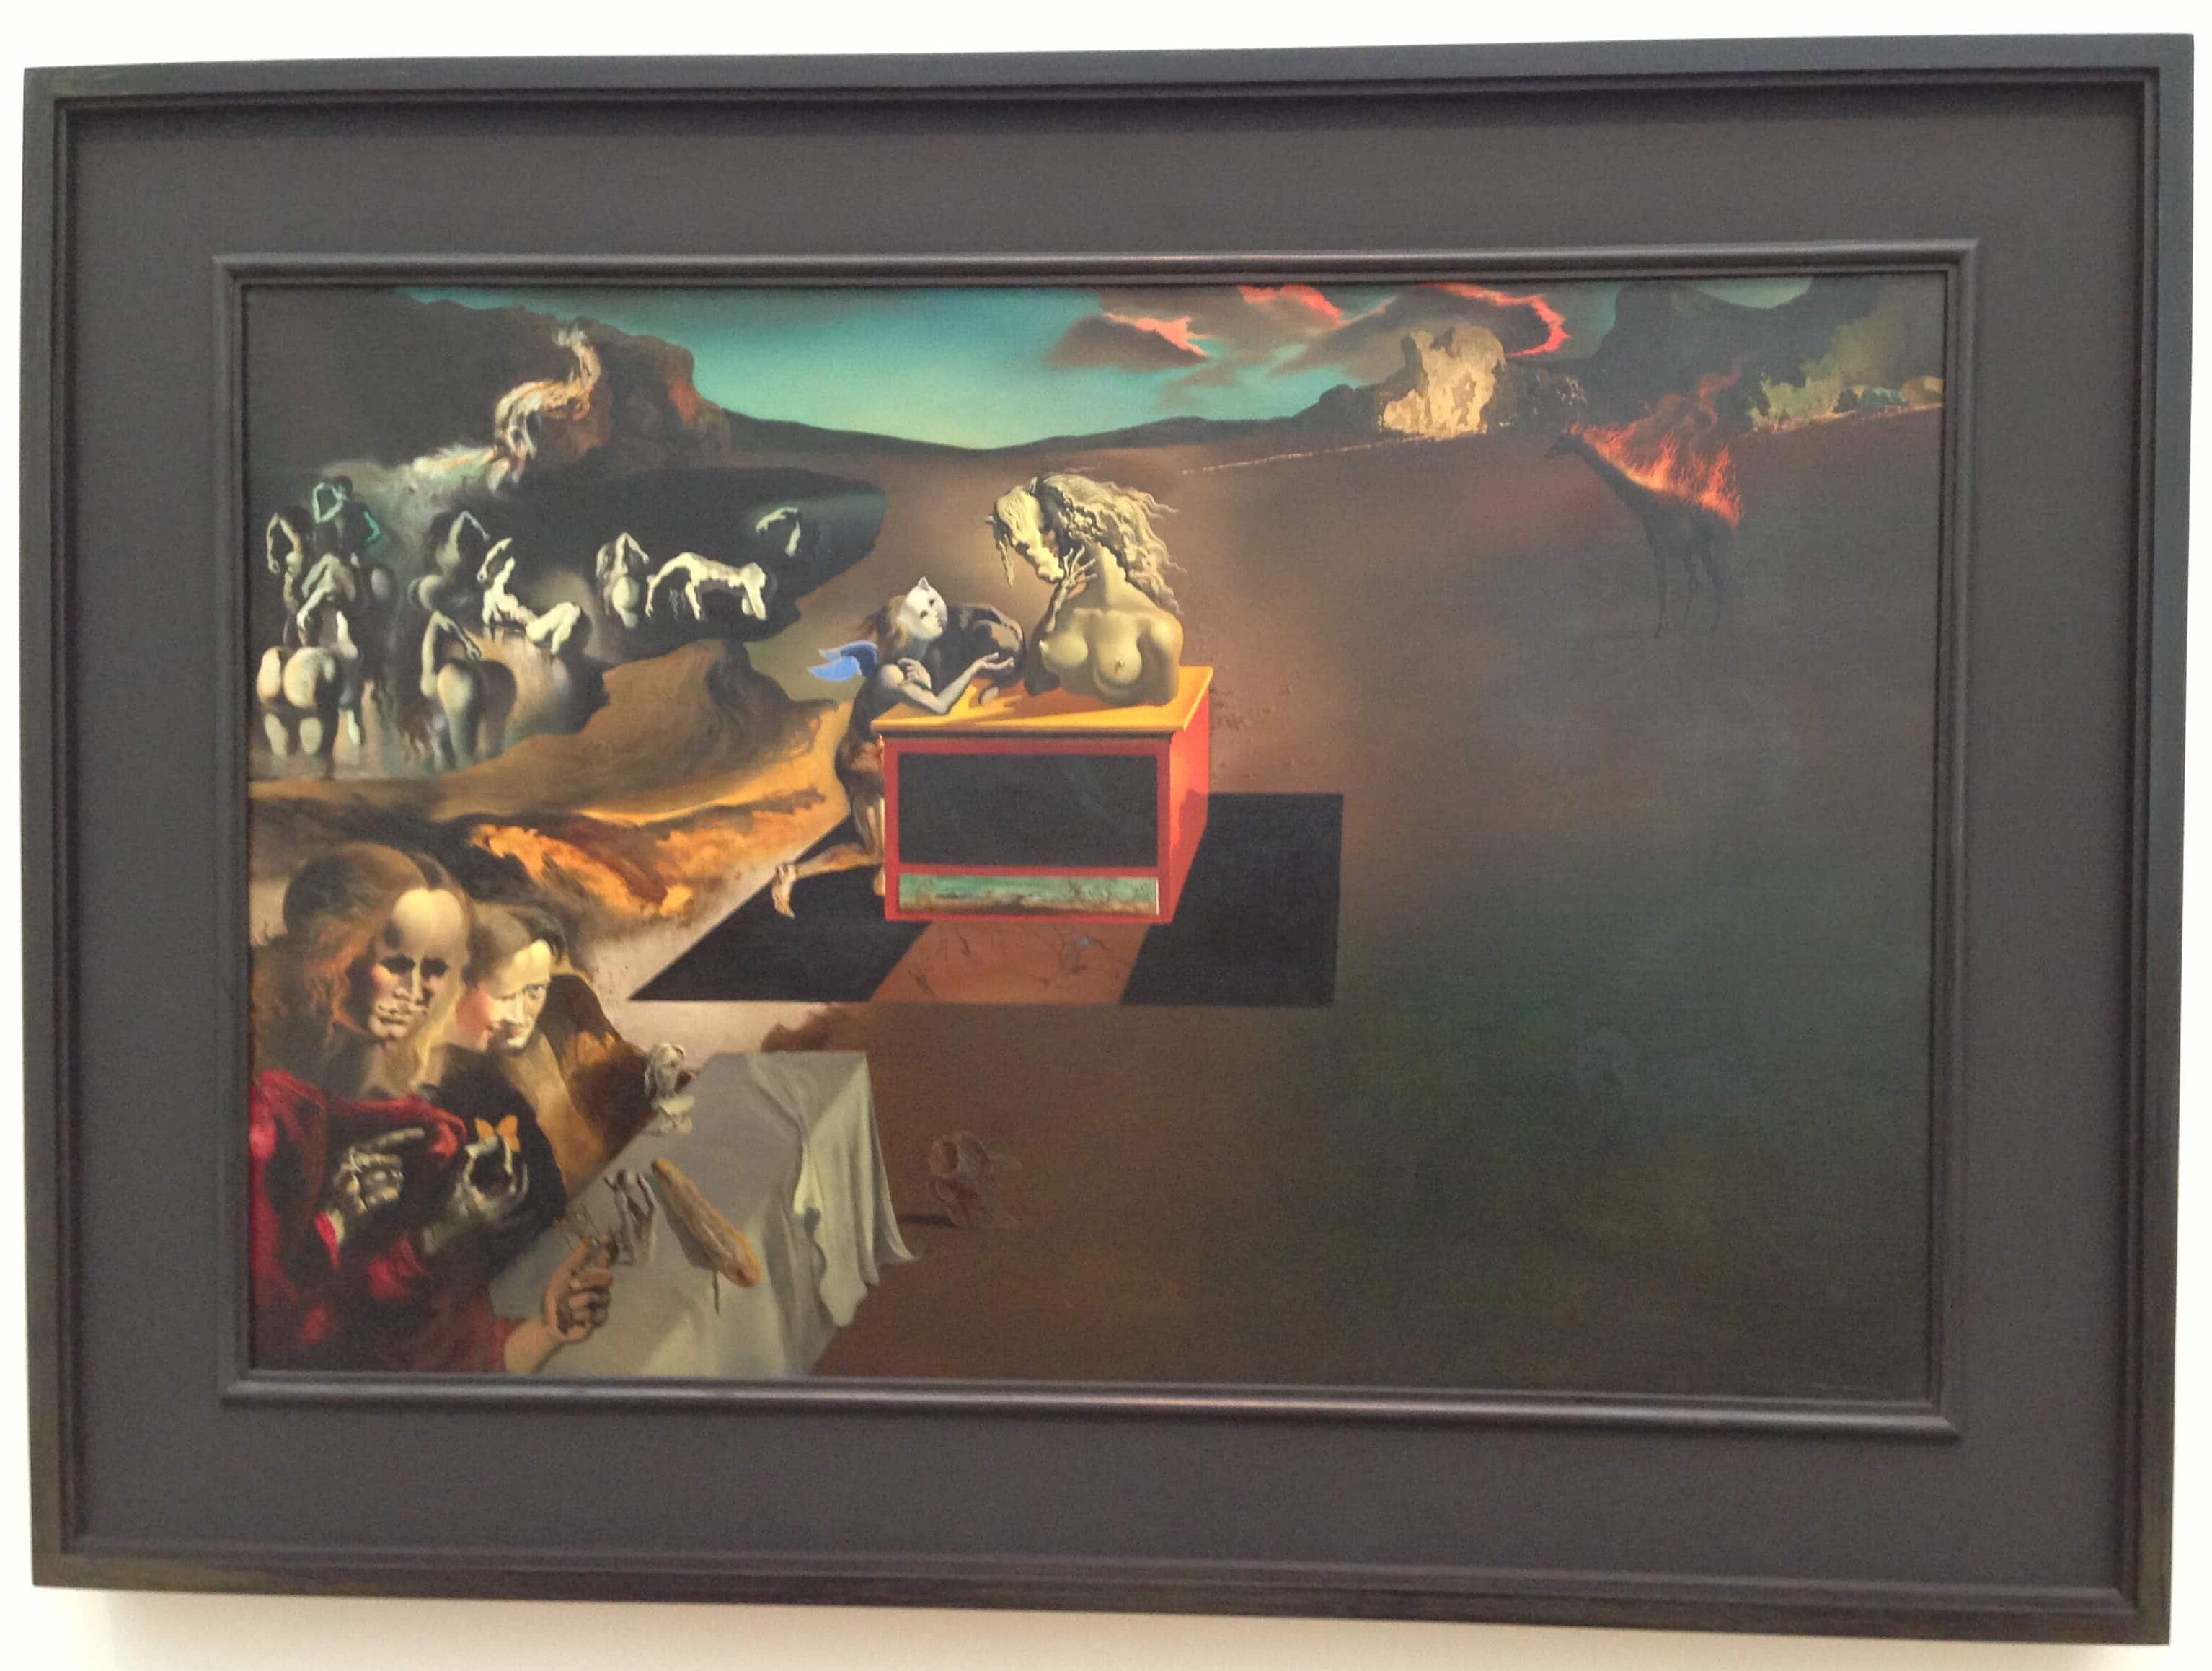 Inventions of the Monsters by Salvador Dalí (1937) at the Art Institute of Chicago